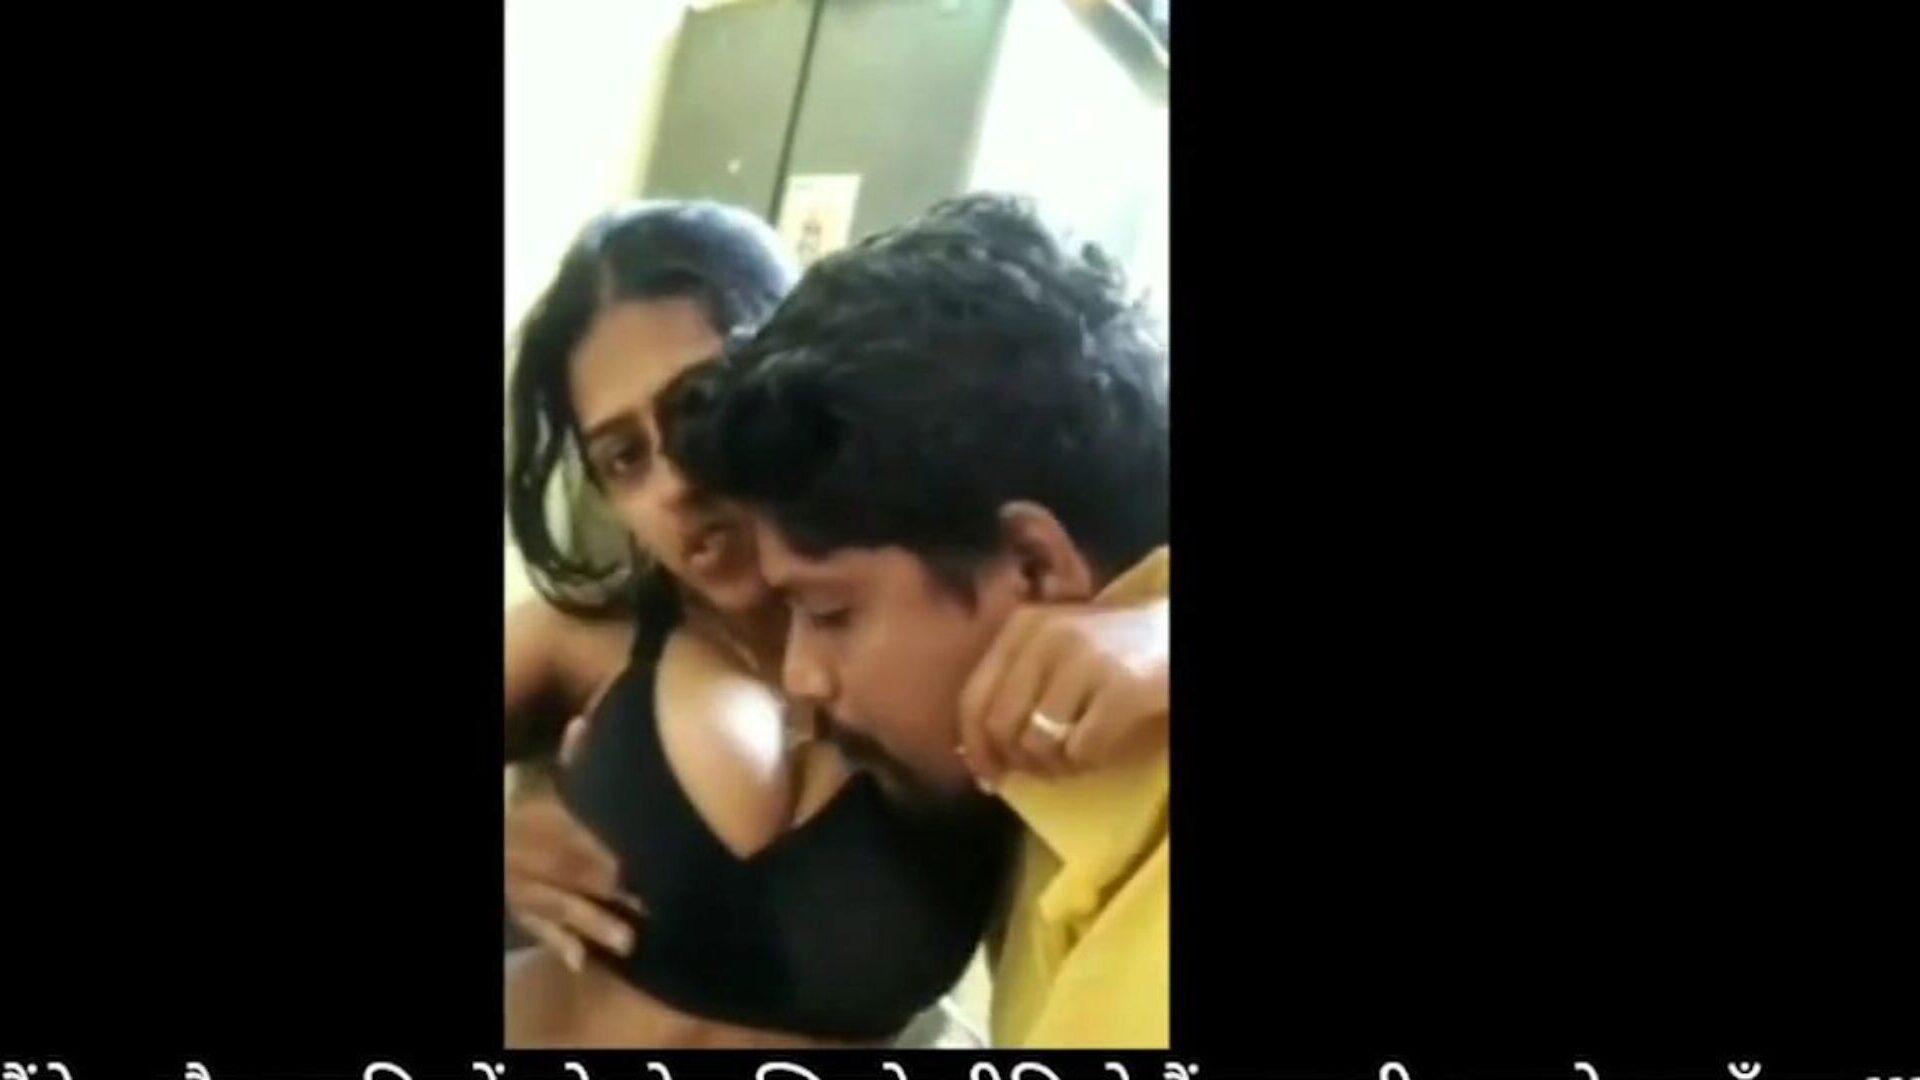 Bhabhi Devar Home Sex Fun During Lockdown: Free HD Porn fa Watch Bhabhi Devar Home Sex Fun During Lockdown episode on xHamster - the ultimate archive of free-for-all Indian Free Home Sex HD xxx pornography tube vids